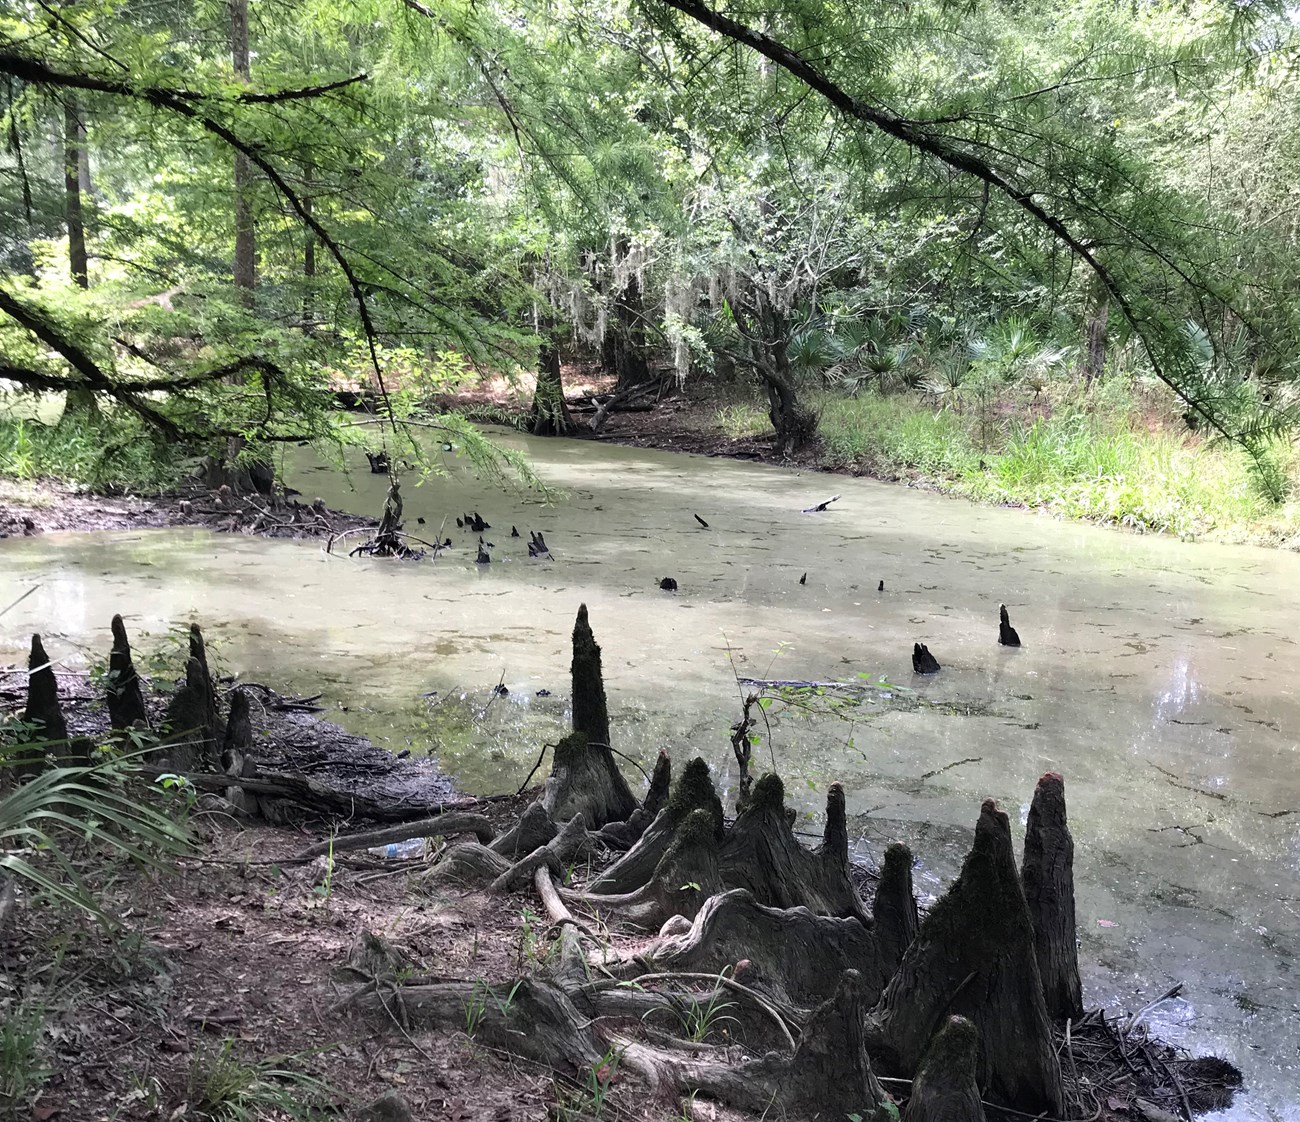 Small bayou with bald cypress trees